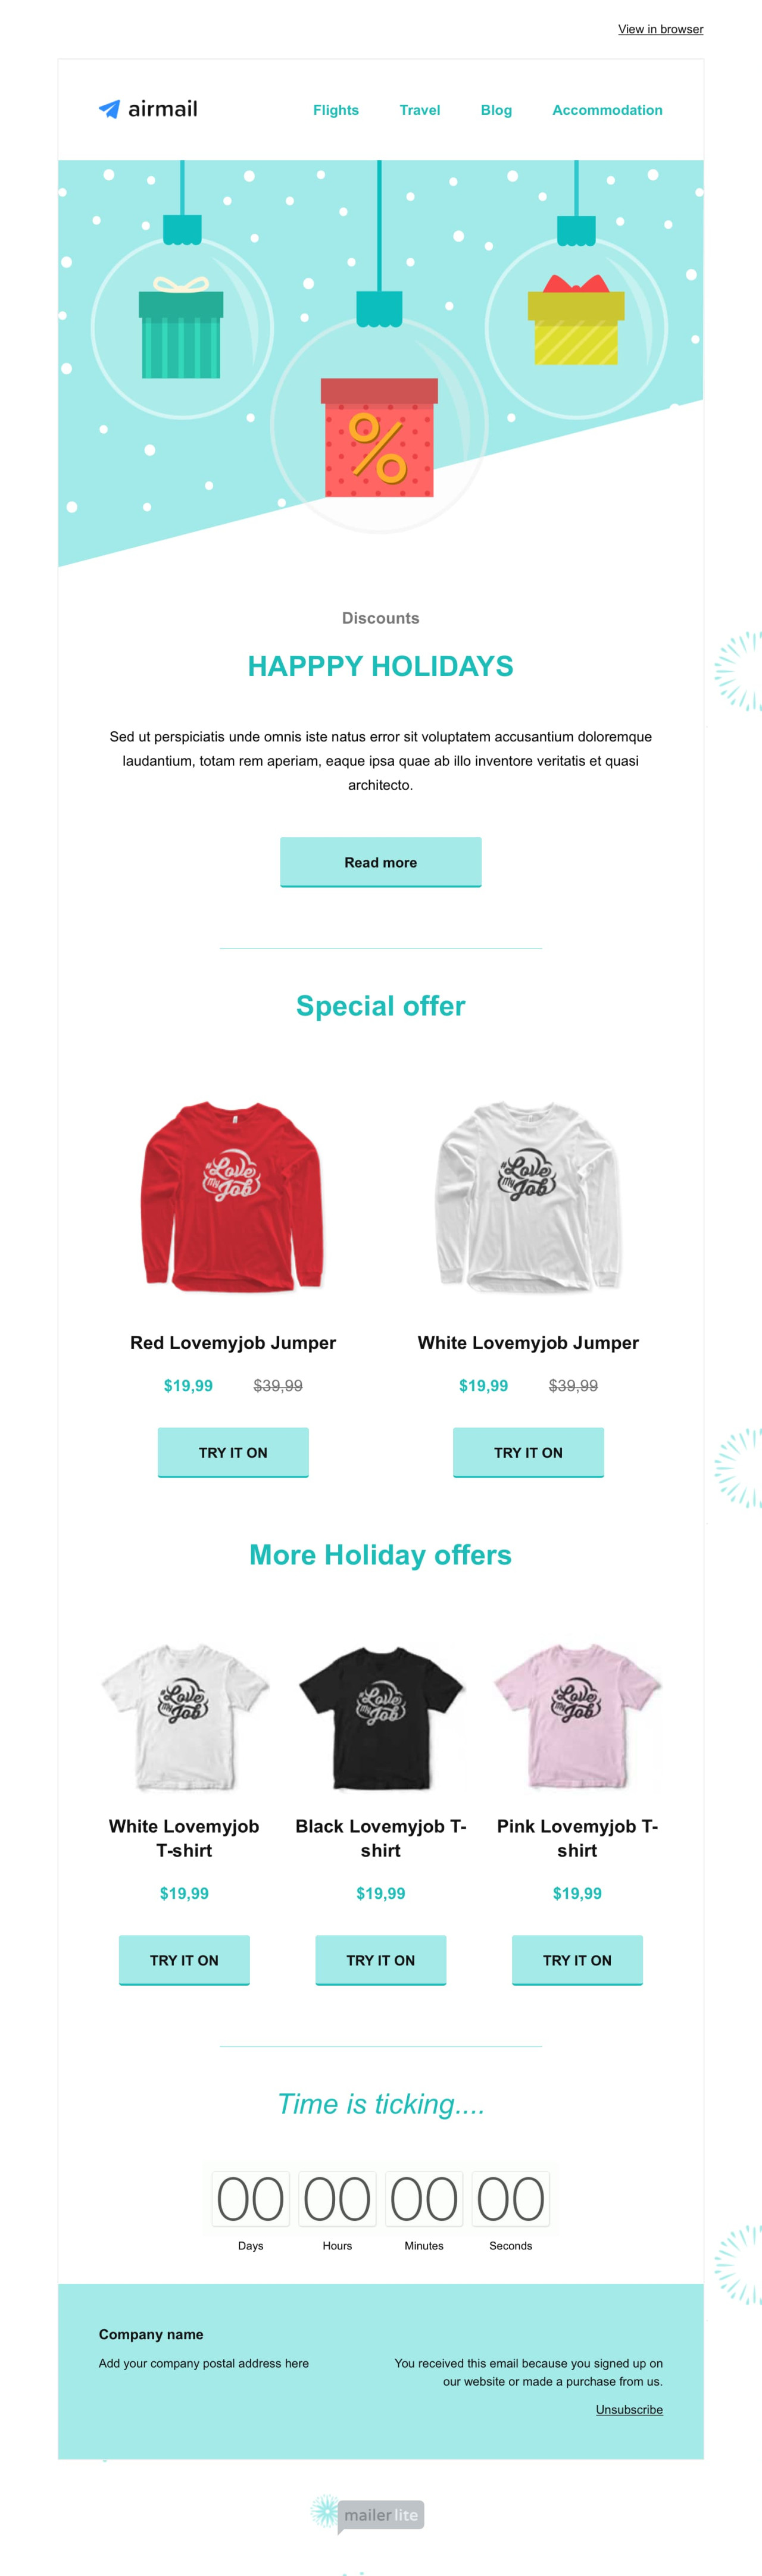 Christmas shopping email template - Made by MailerLite